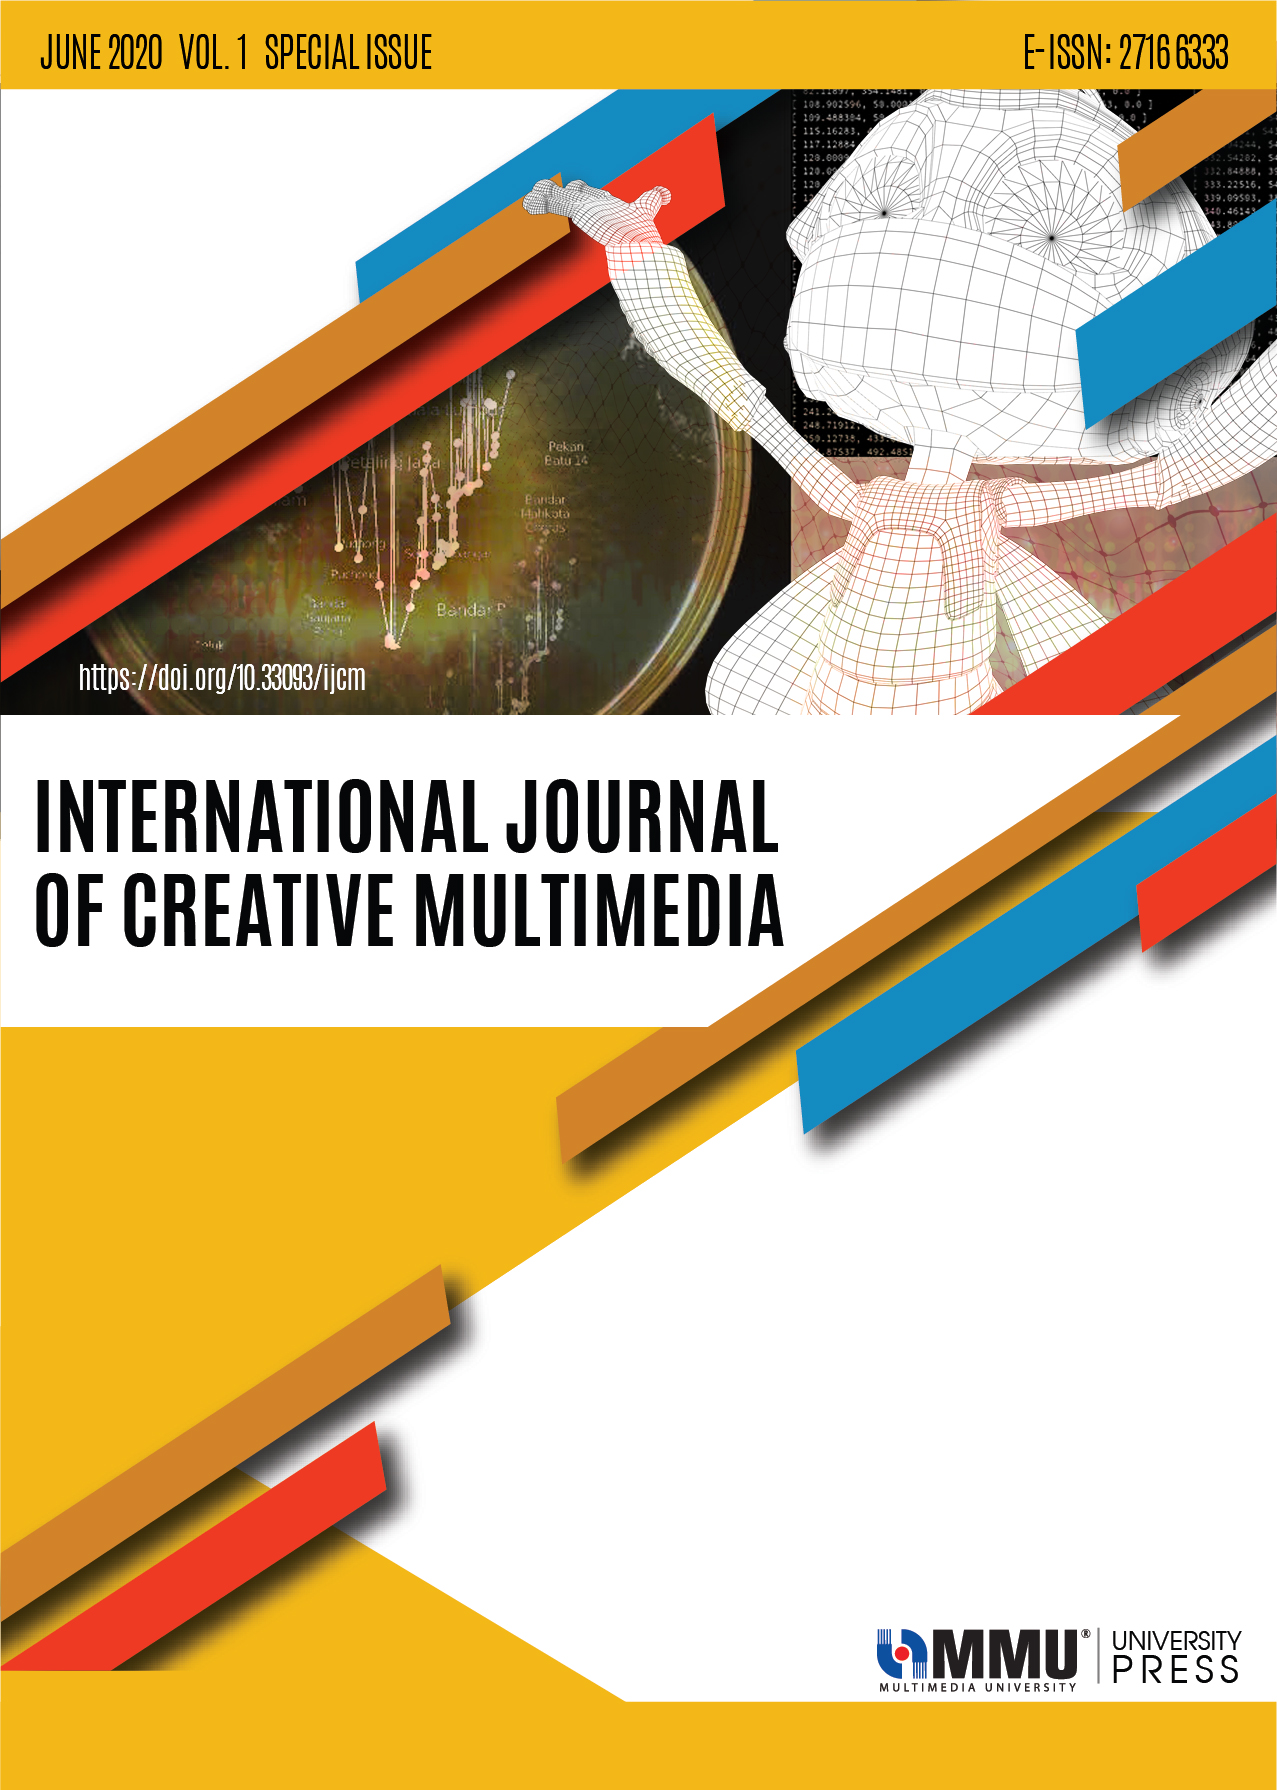 Cover page IJCM Volume 1 Special Issue 1